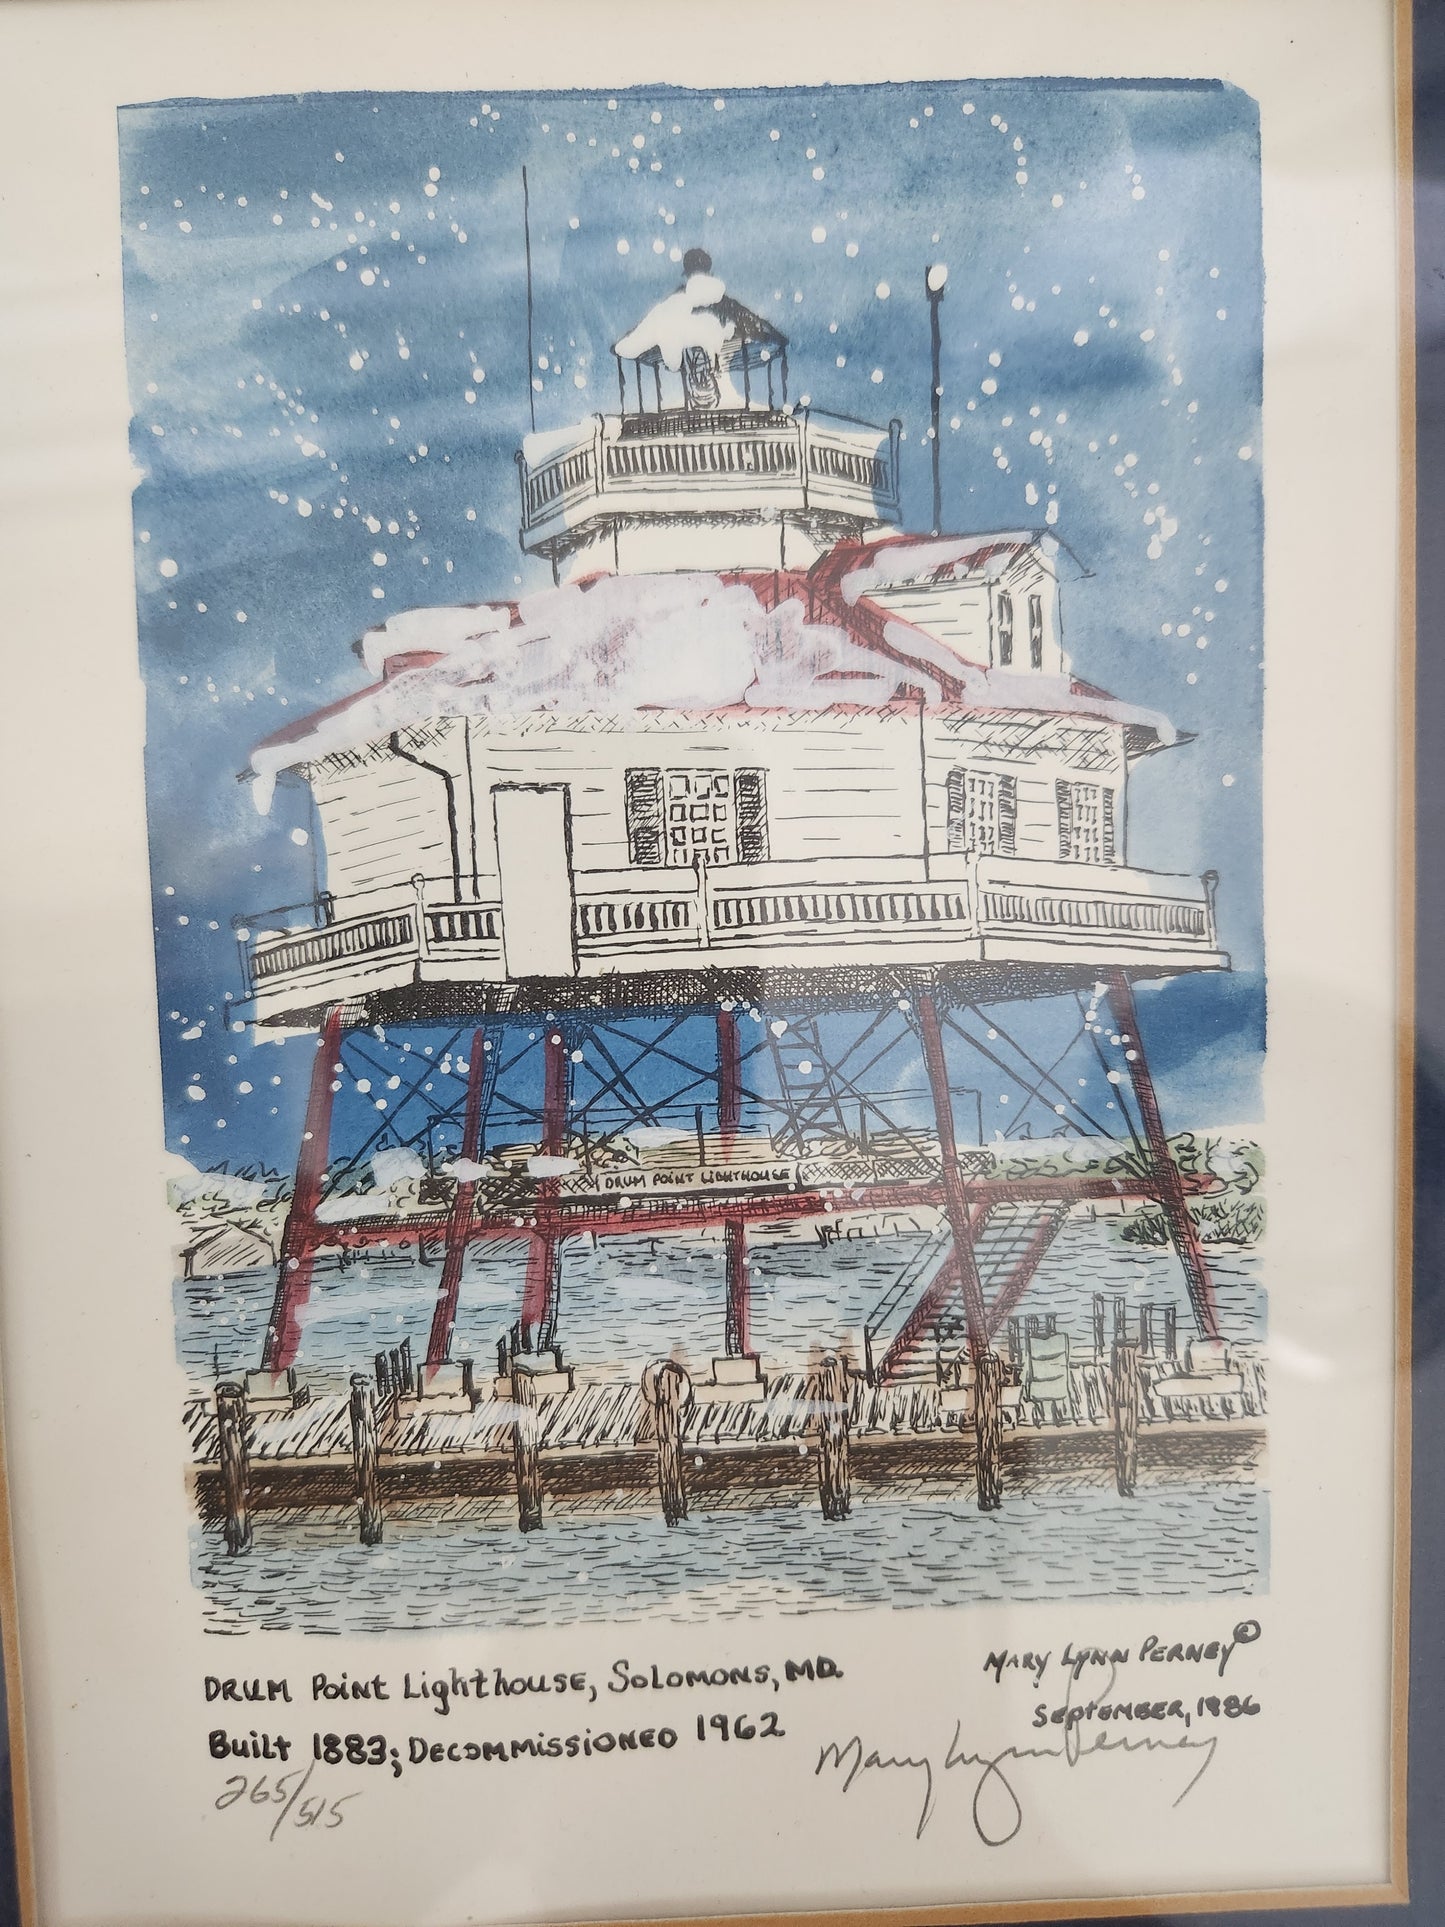 Artist Mary Lynn Perney: Drum Point Lighthouse Print Signed & Numbered 265/515